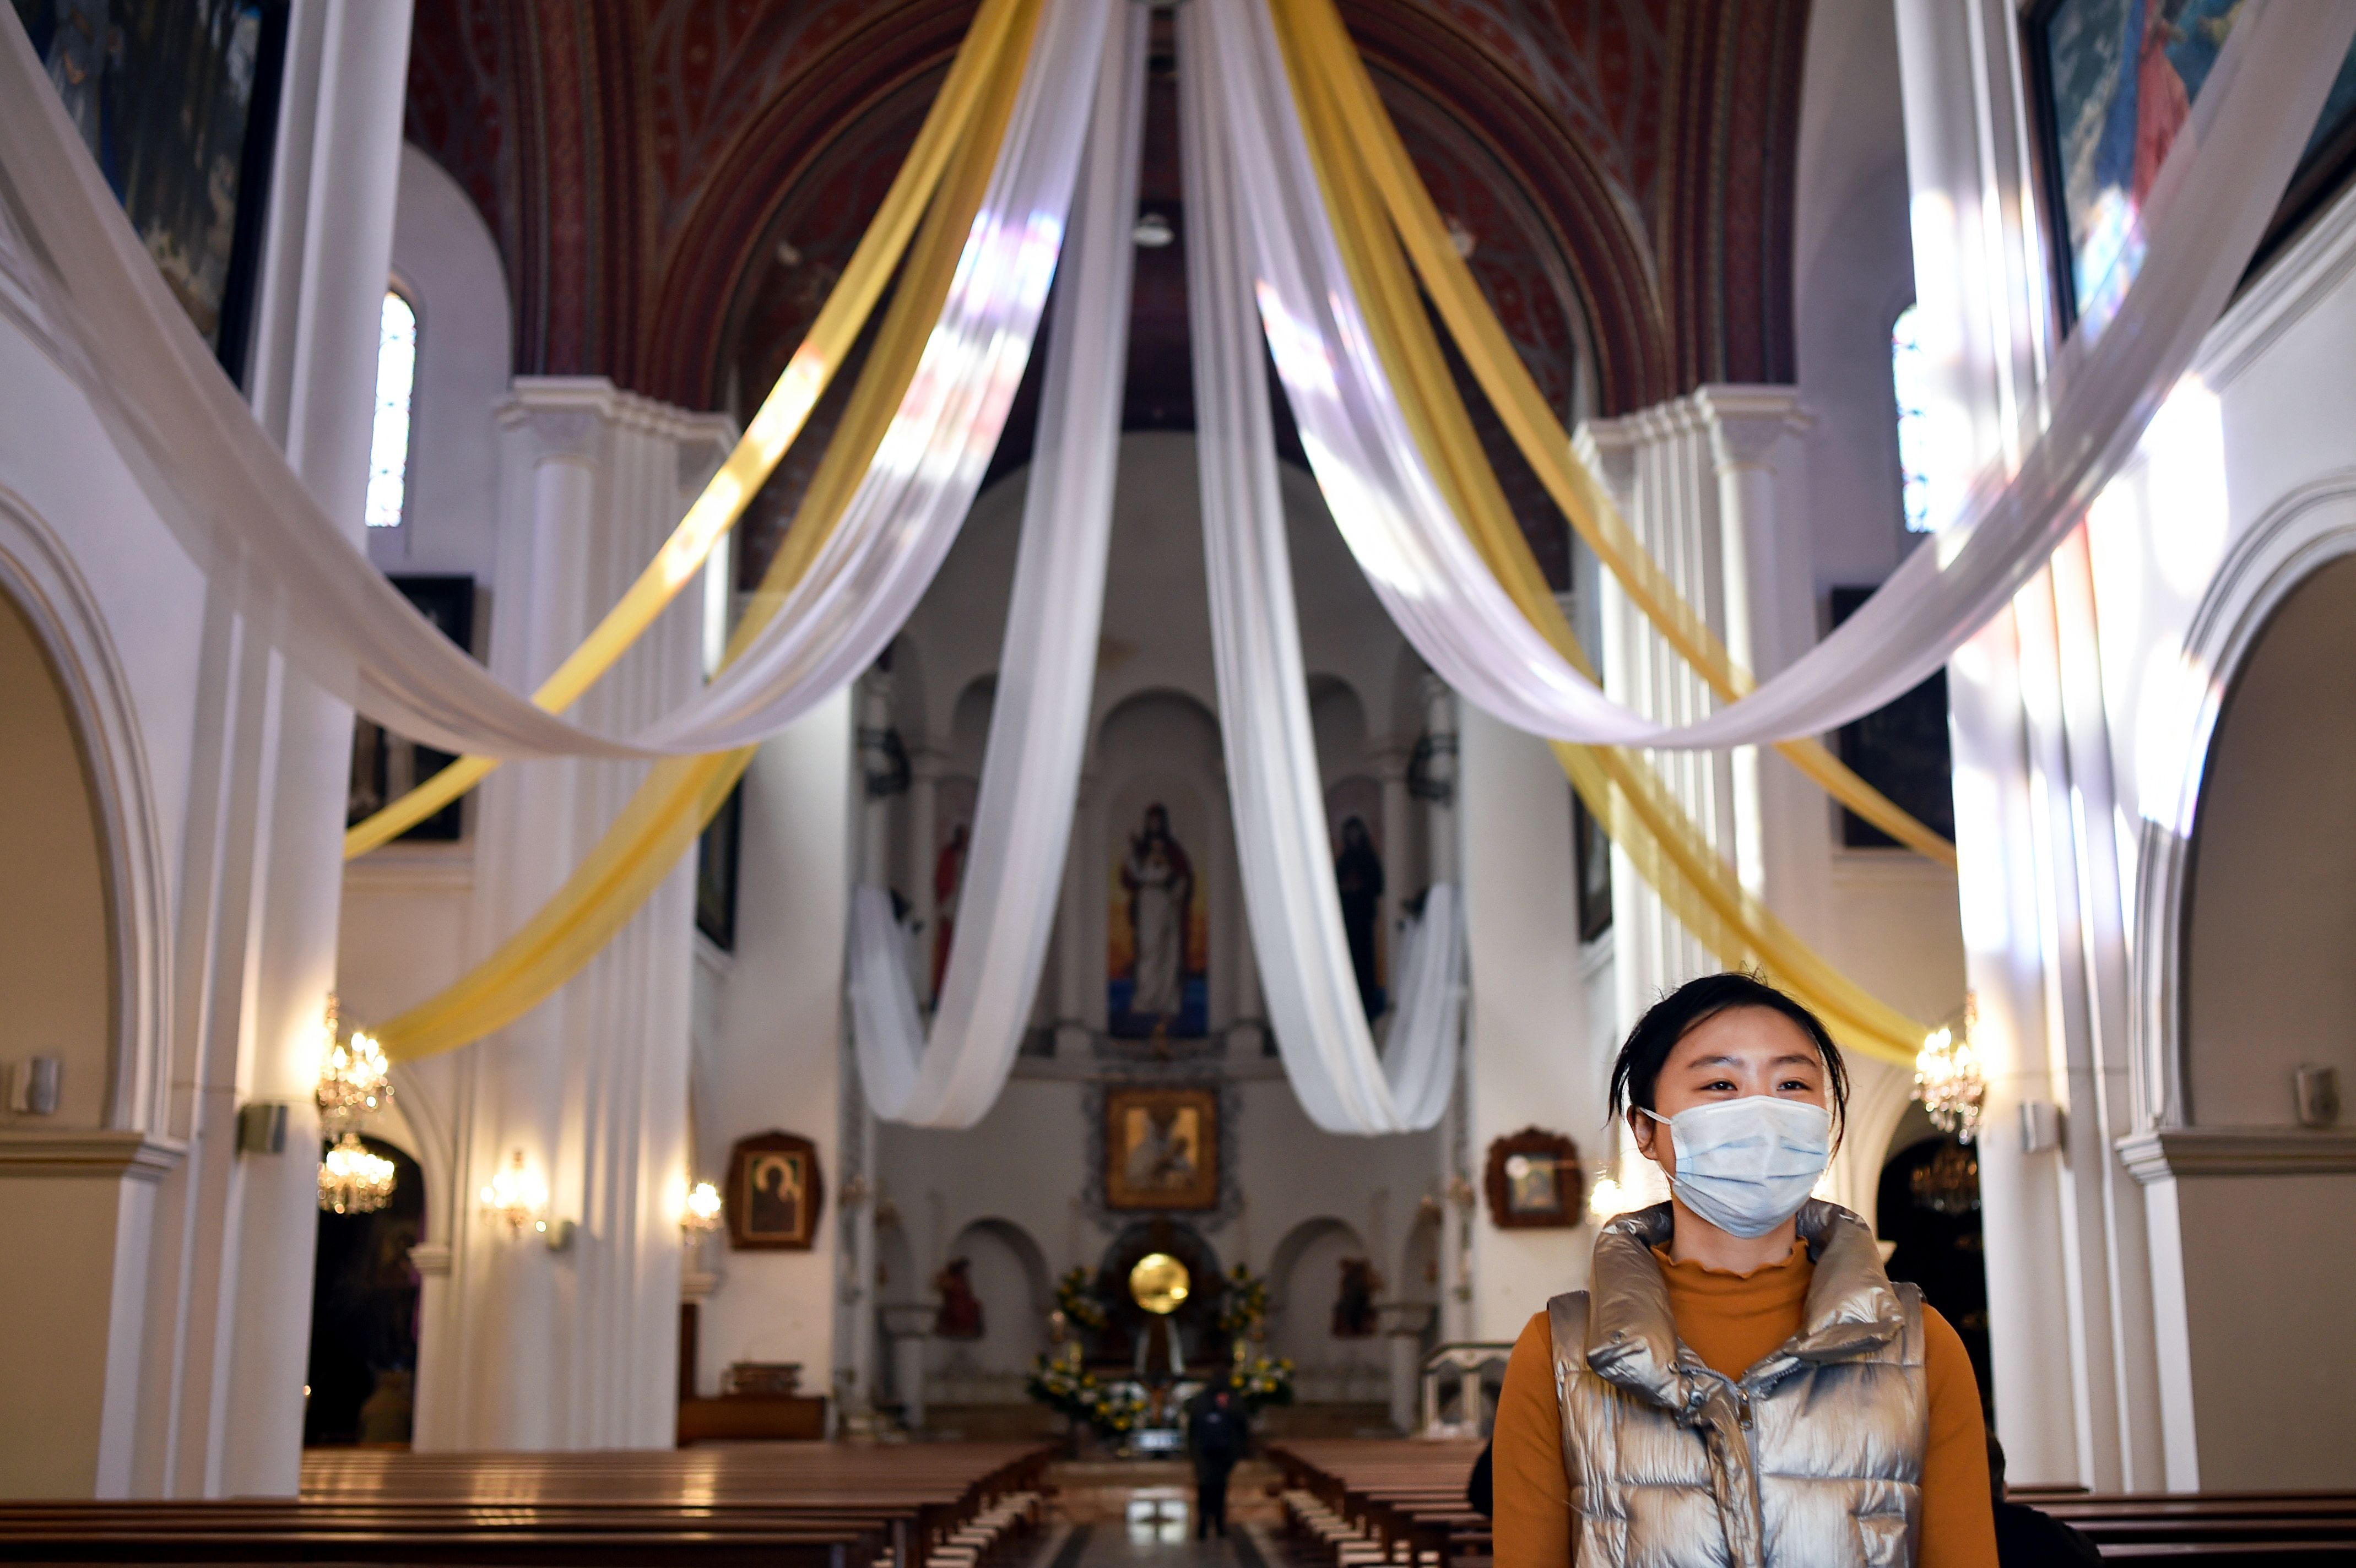 A woman wears a mask in a cathedral in this image